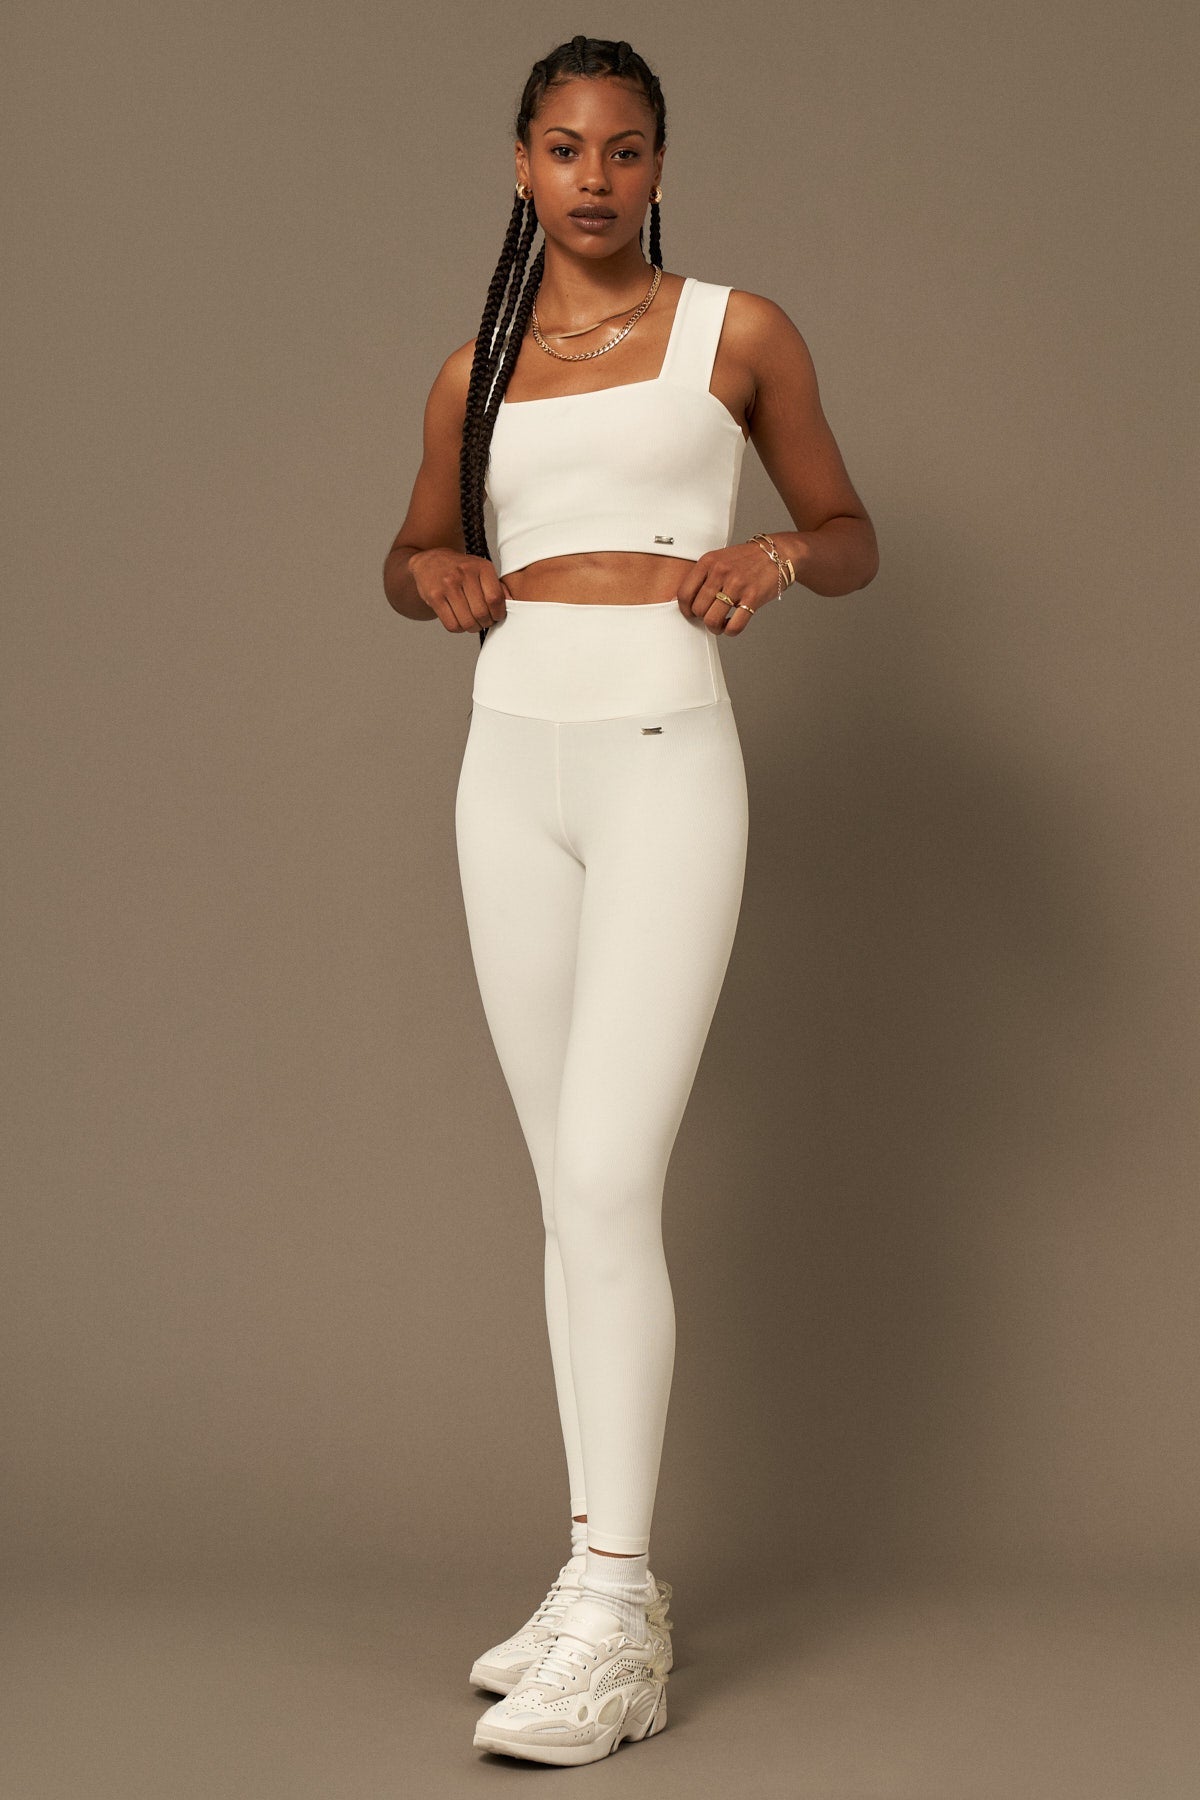 Daily Legging in Pearl White-Long Leggings-Store Clothing Sustainable Recycled Yoga Leggings Women On-line Barcelona Believe Athletics Sustainable Recycled Yoga Clothes